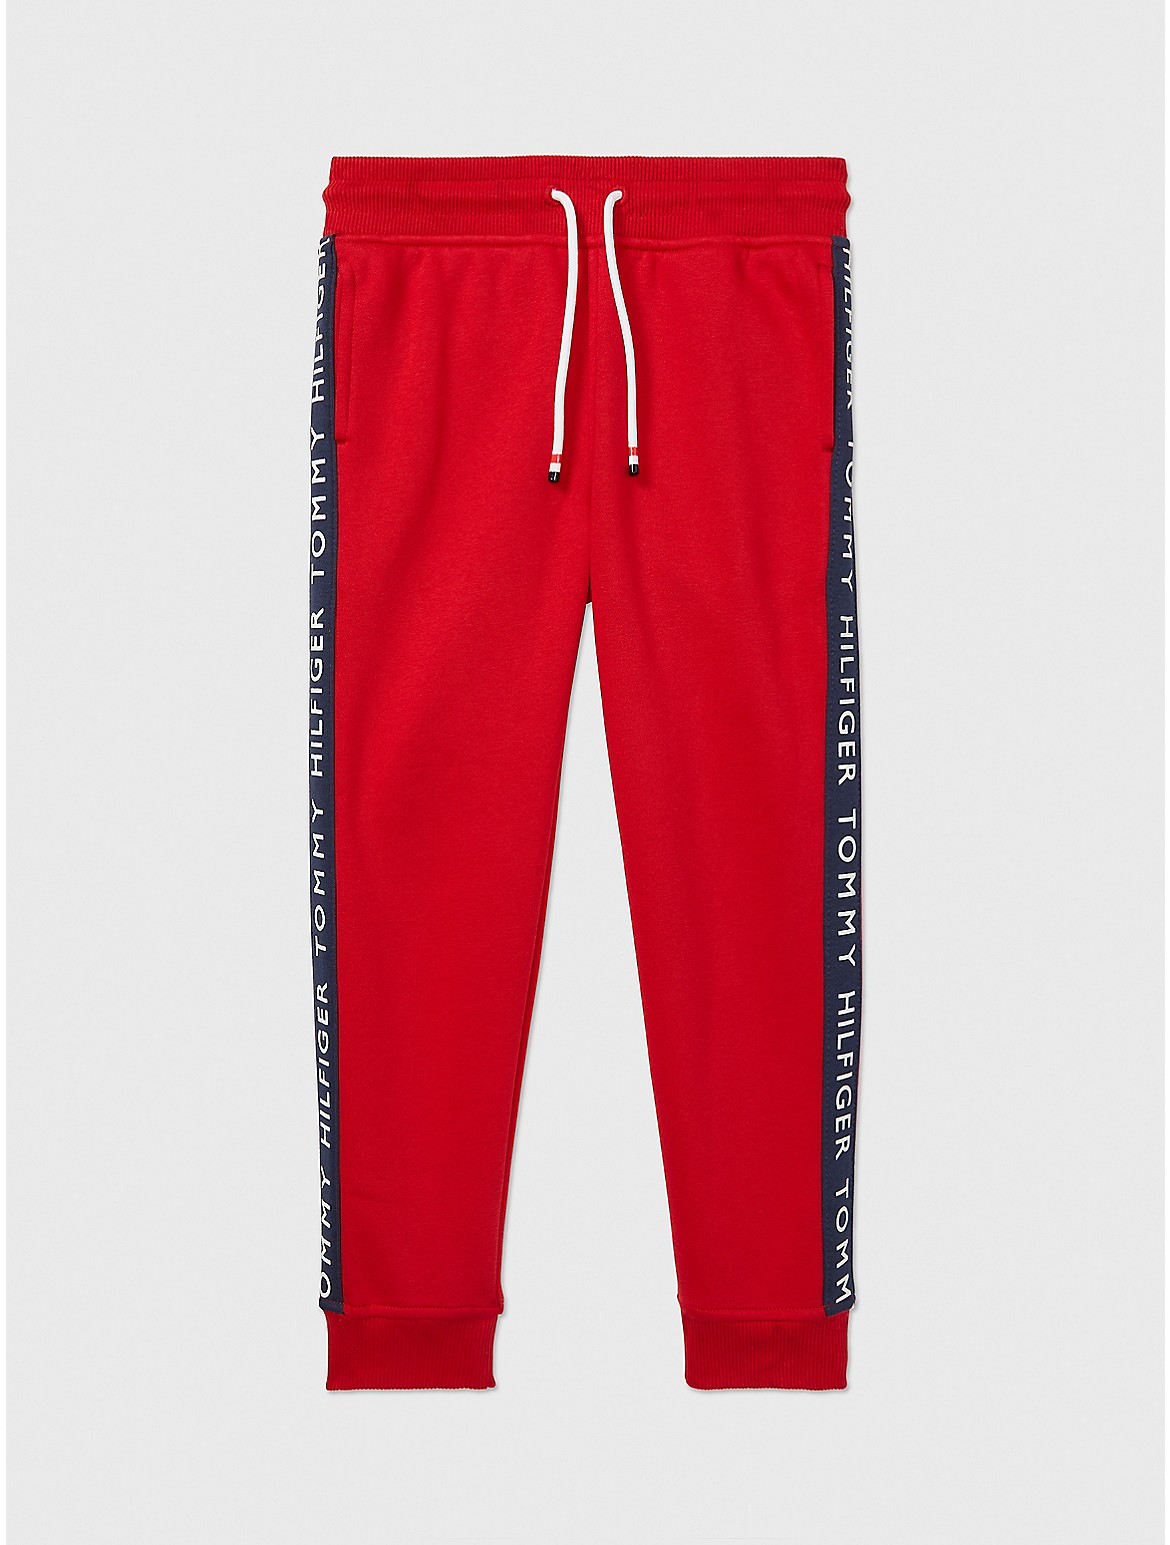 Tommy Hilfiger Boys' Glow In The Dark Sweatpant - Red - S